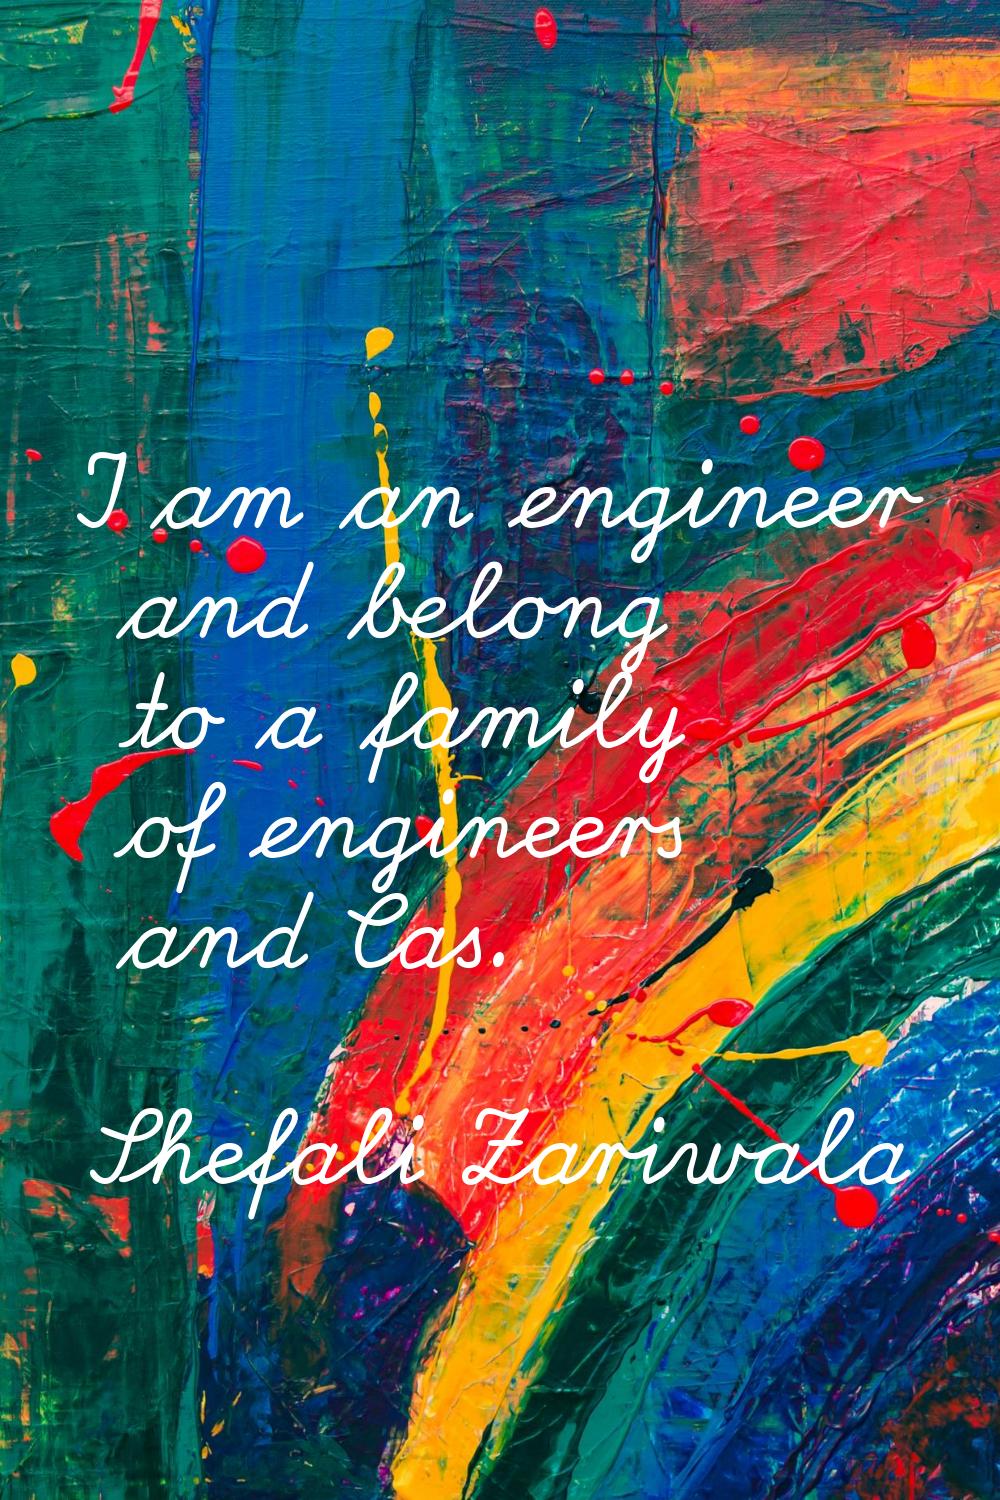 I am an engineer and belong to a family of engineers and Cas.